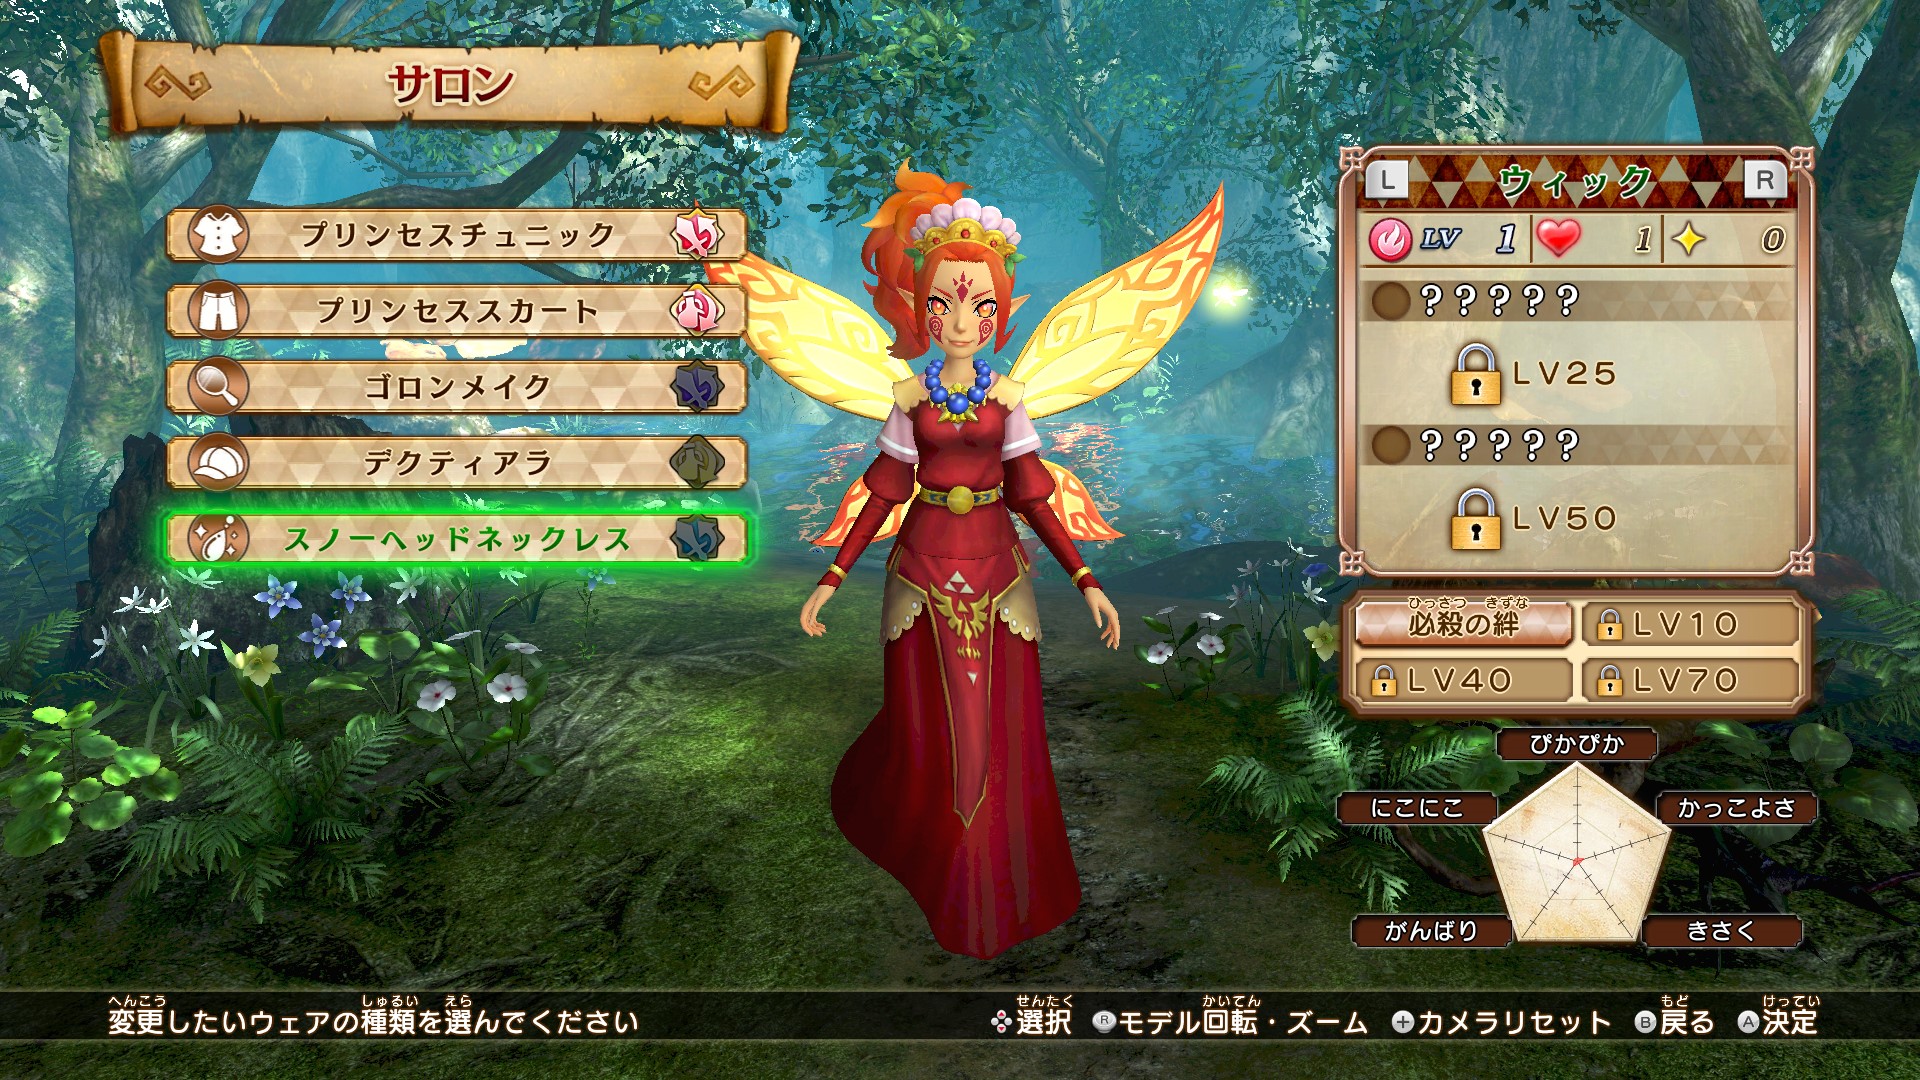 Koei Tecmo published another round of screenshots from Hyrule Warriors: Def...